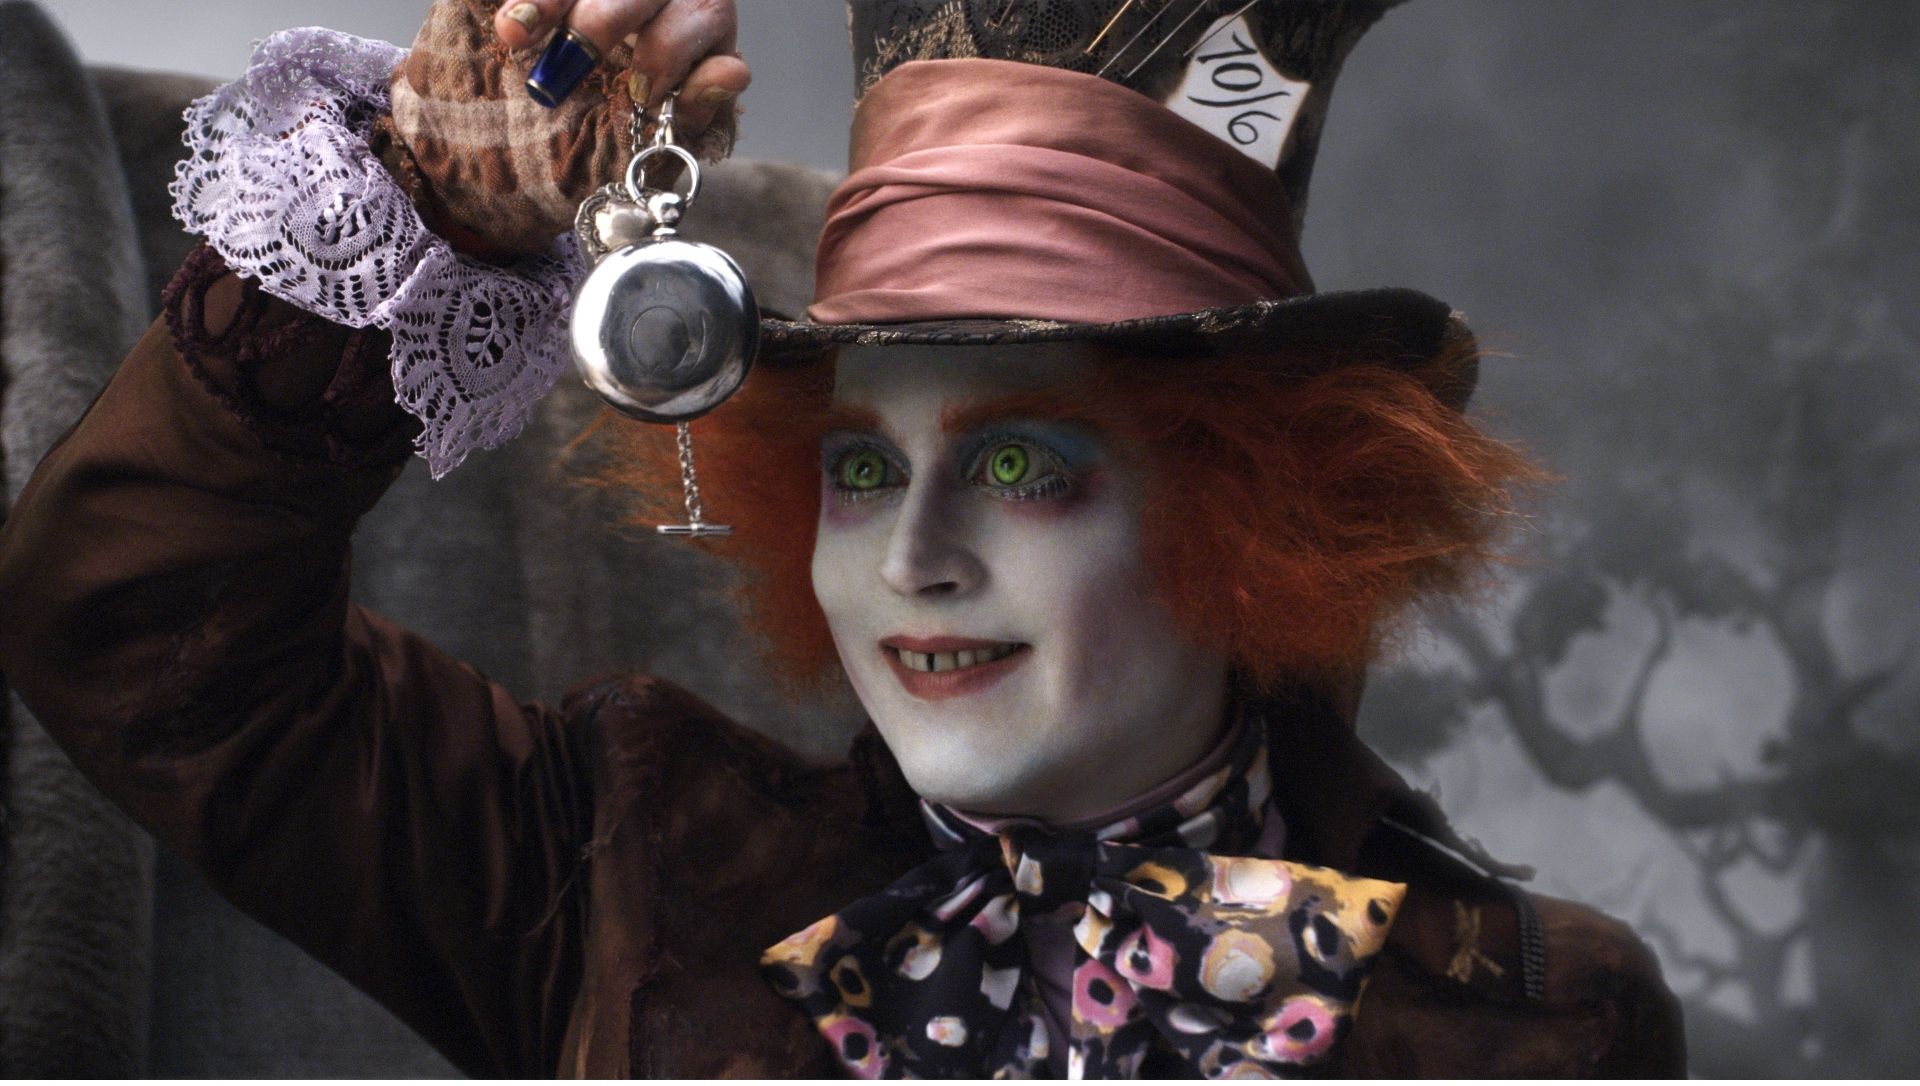 Johnny Depp Talks About Being the Mad Hatter in Alice in Wonderland